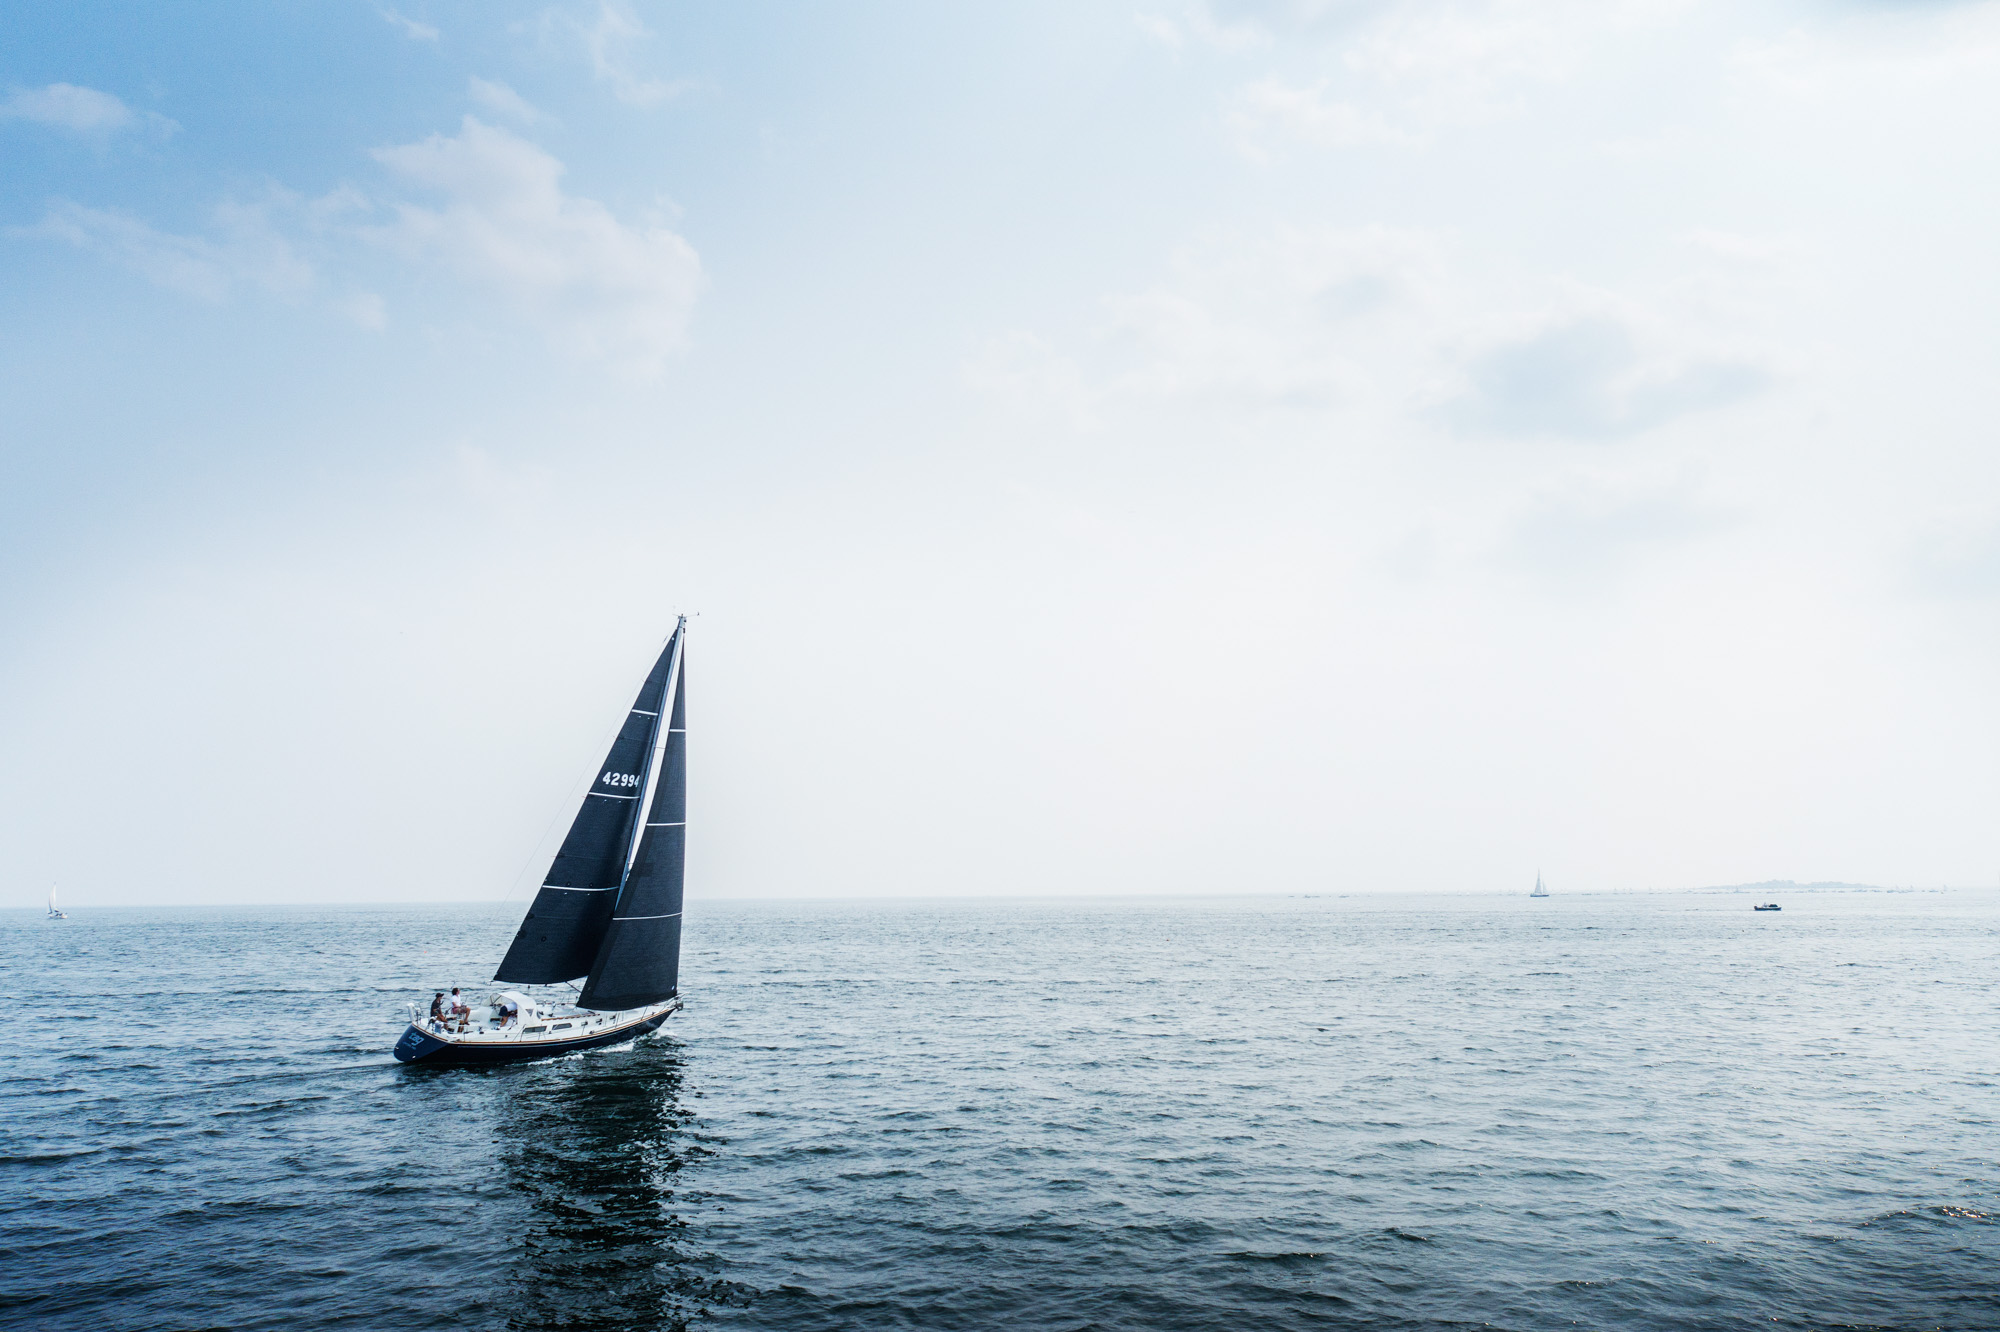 North Sails by Boston based commercial lifestyle photographer Brian Nevins